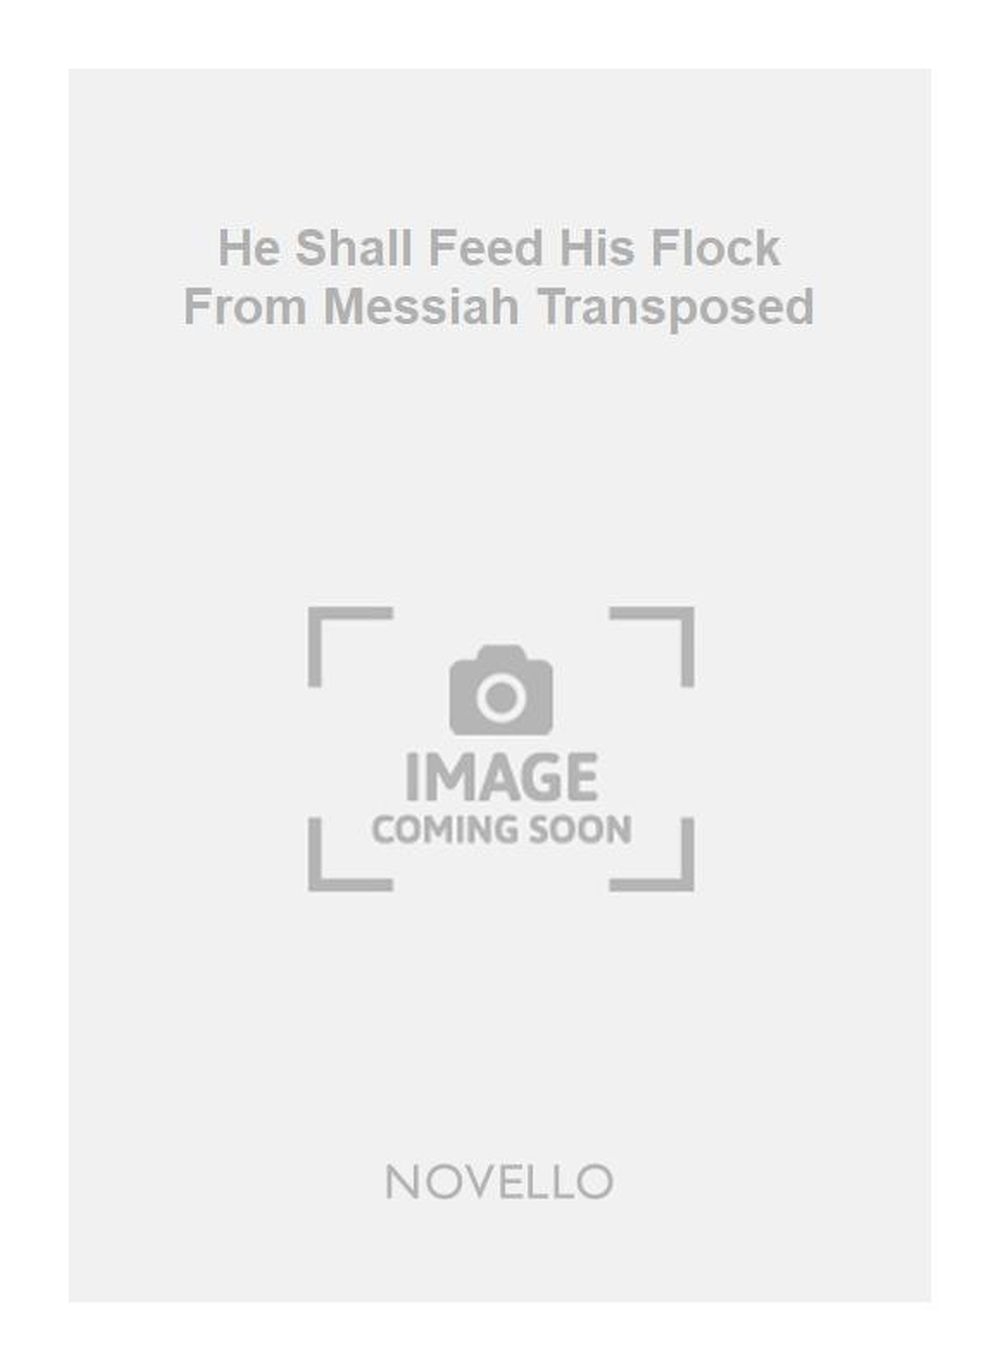 Georg Friedrich Händel: He Shall Feed His Flock From Messiah Transposed